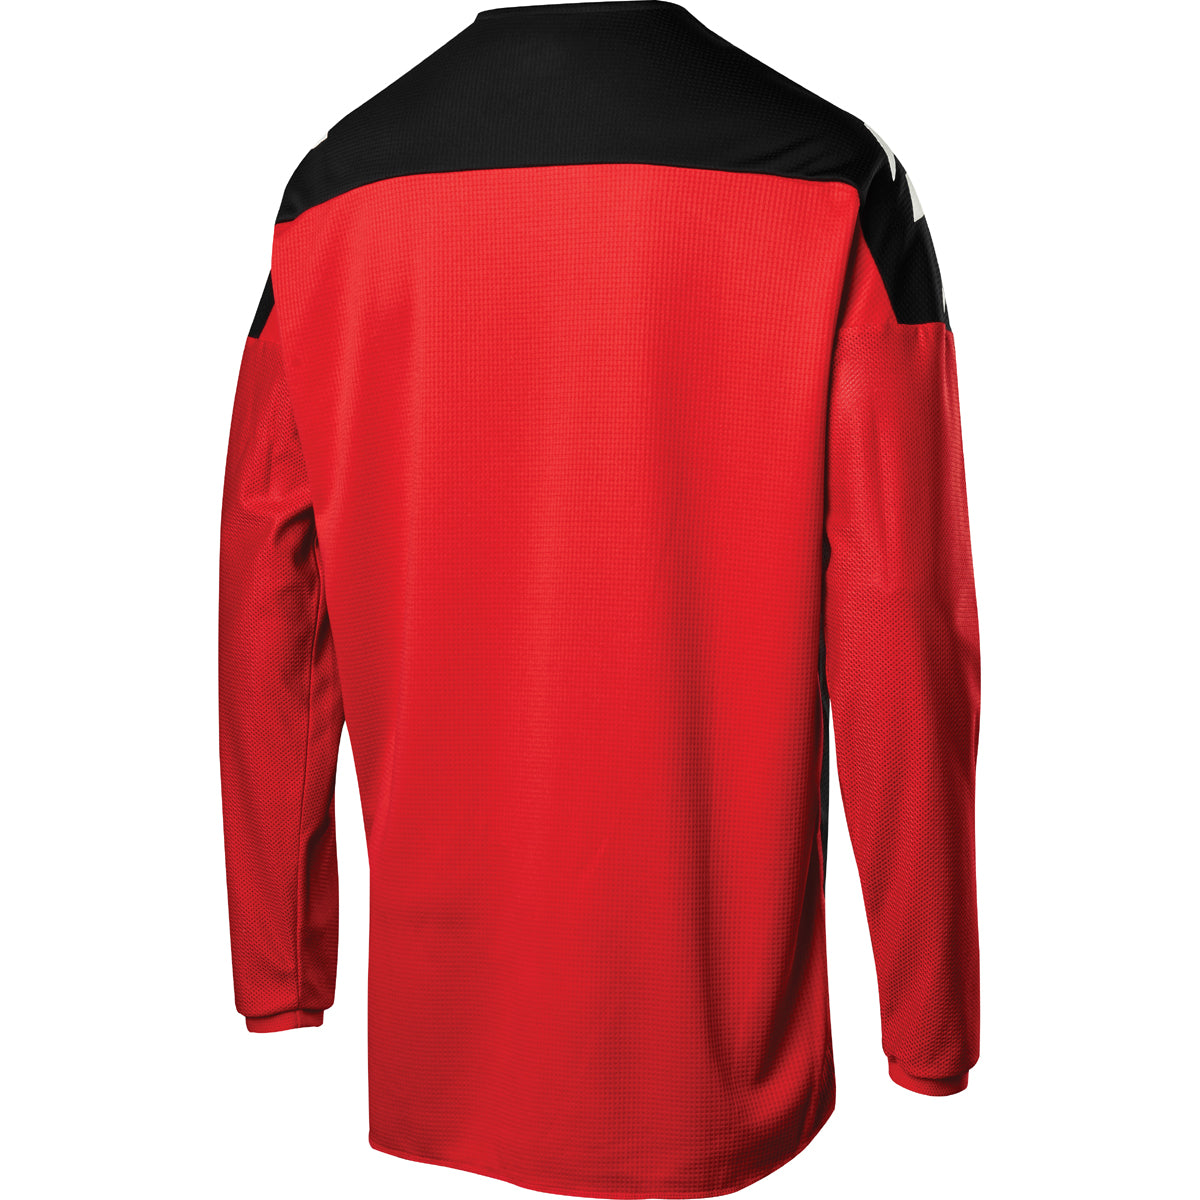 Whit3 Label Race Jersey 1 Black/Red